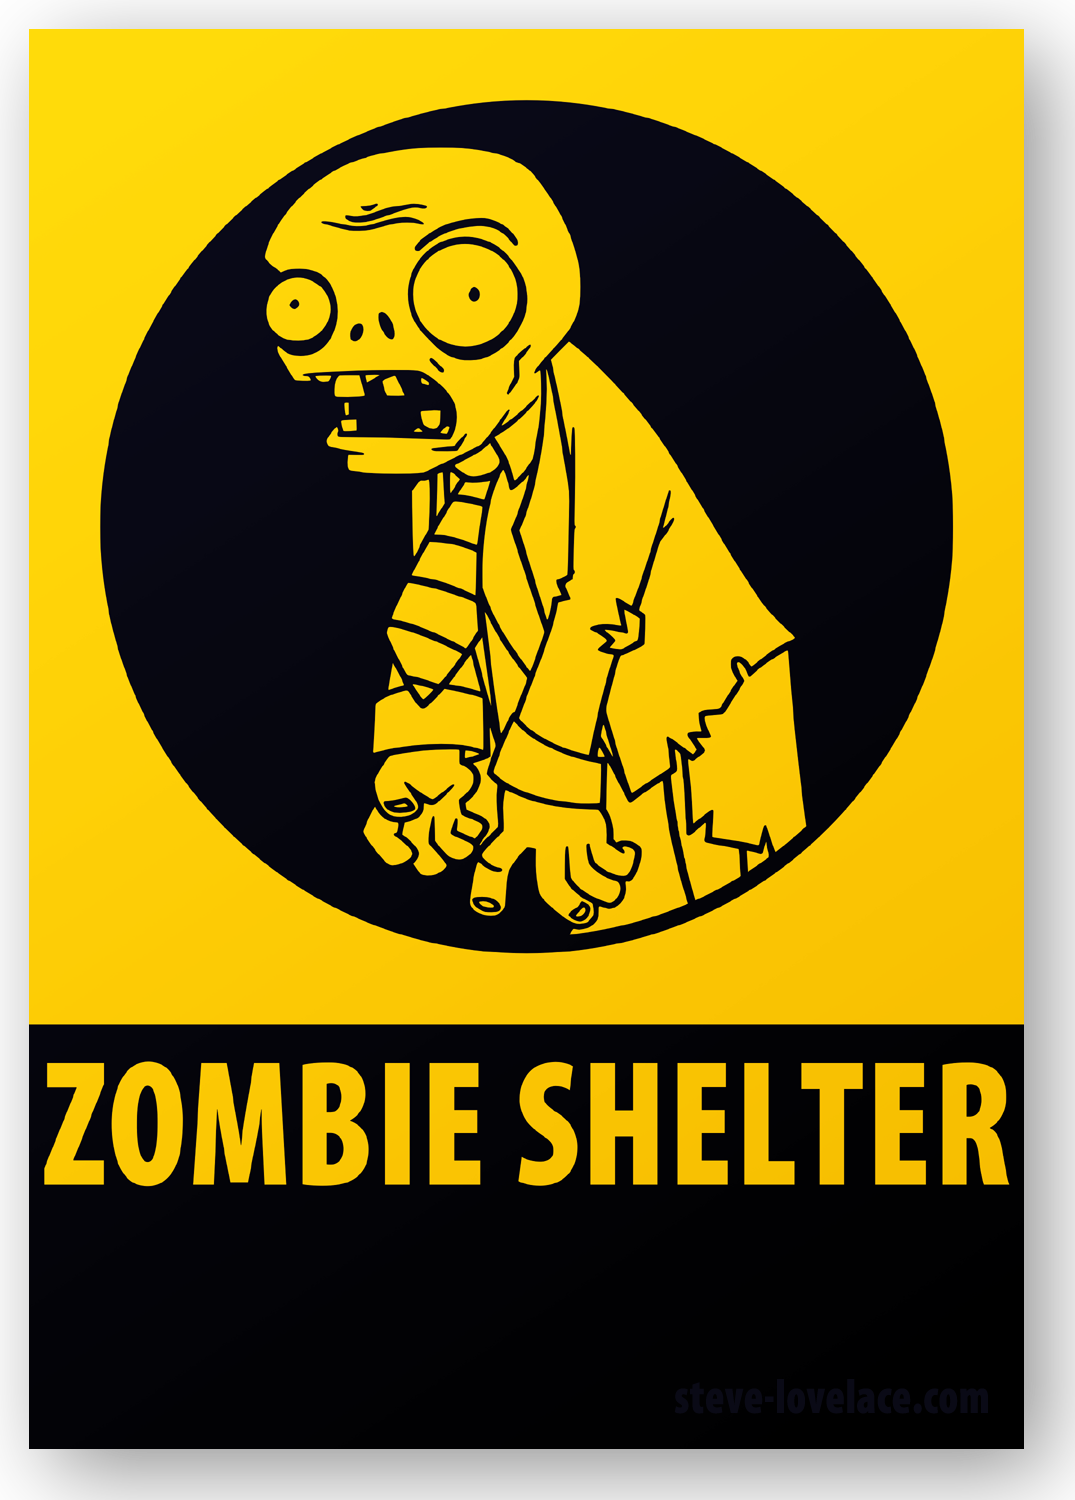 fallout shelter sign cartoon baby